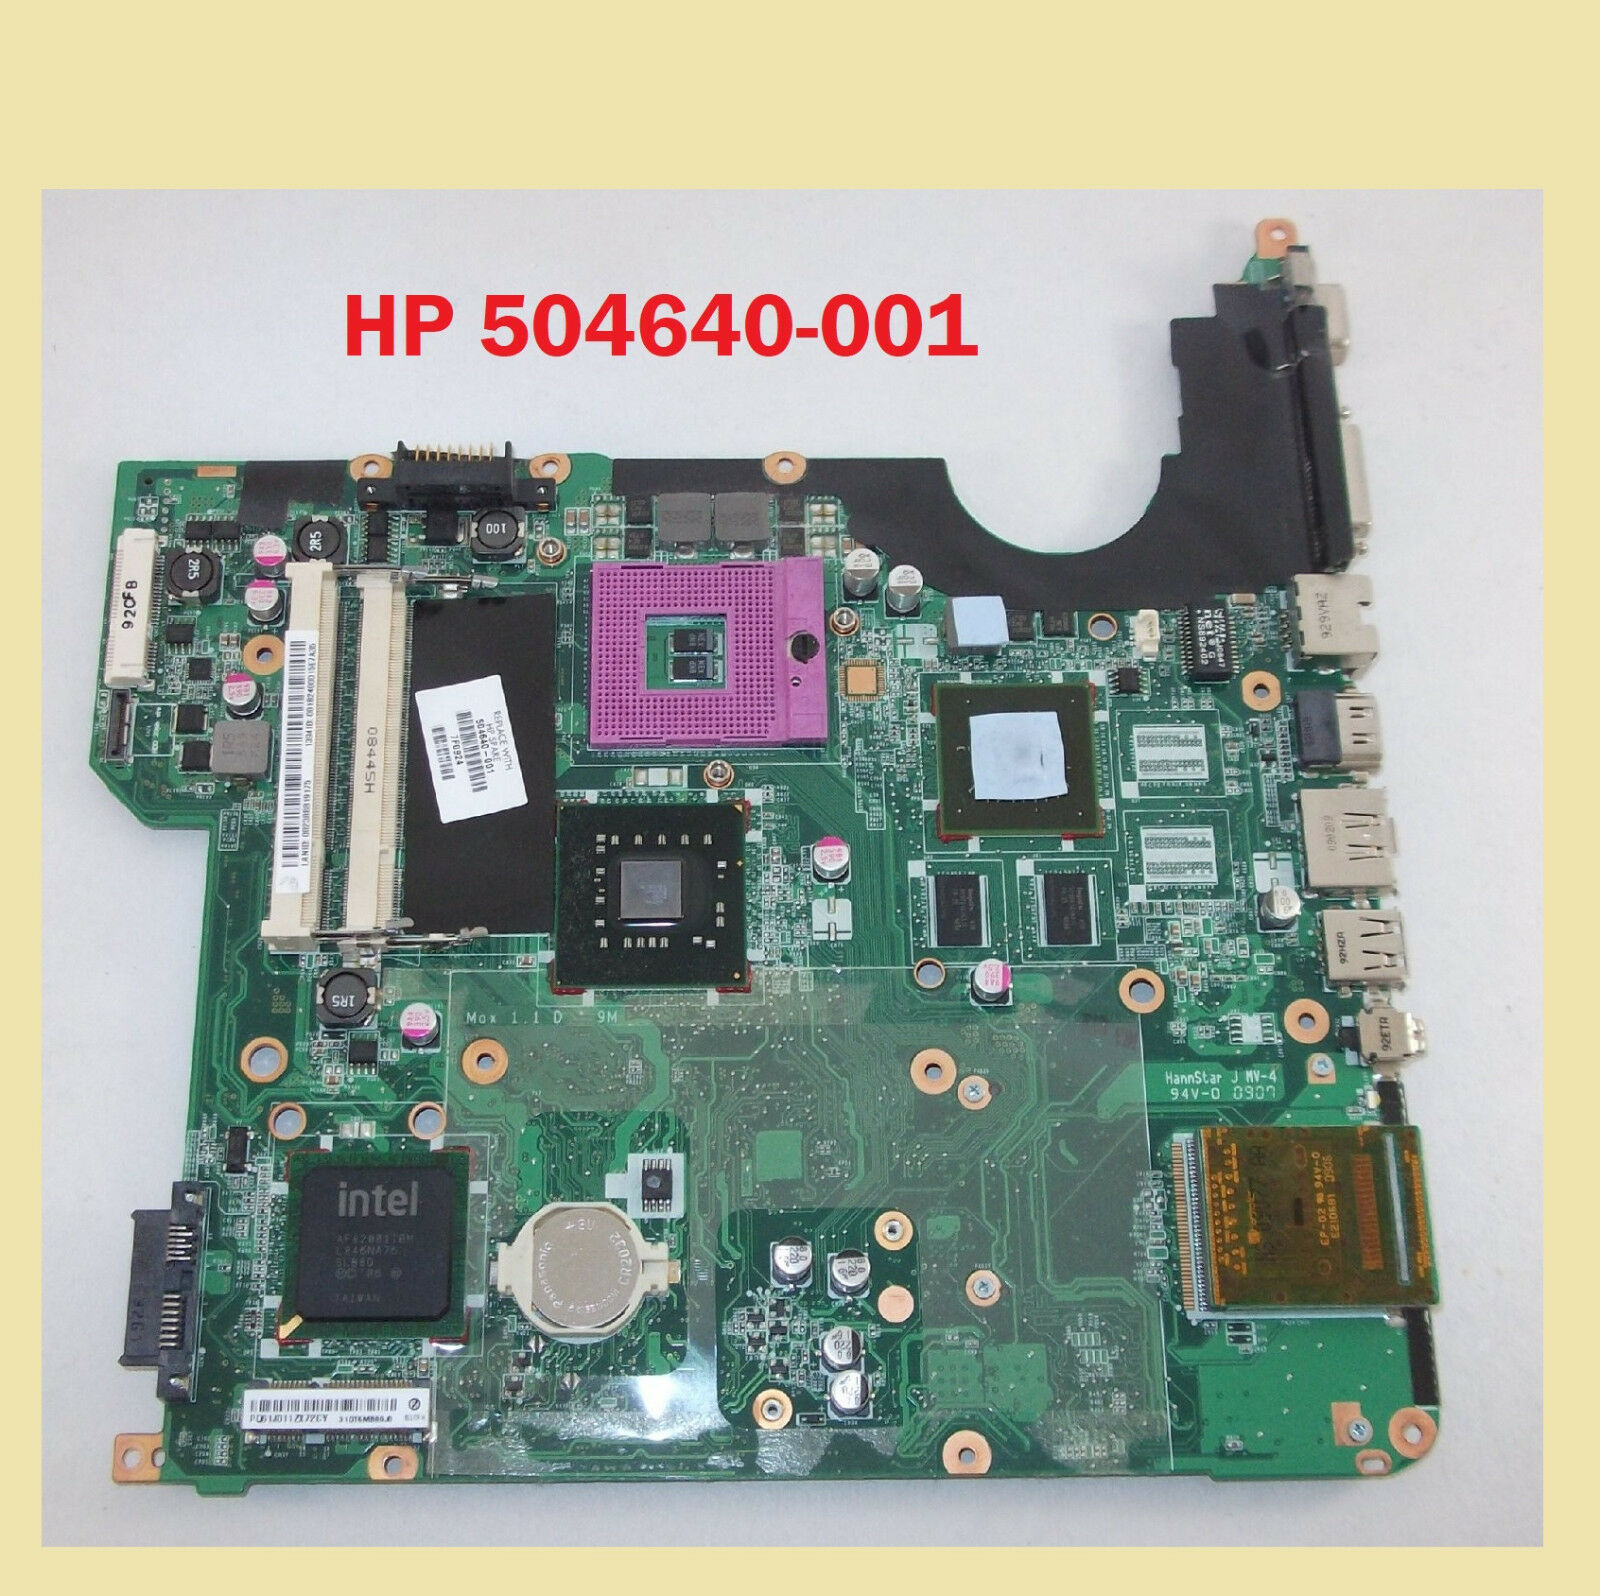 504640-001 Intel PM45 Motherboard for HP DV5-1200 Laptop, DDR2 nVidia 9200 256 A Socket Type: SEE PICS OR - Click Image to Close